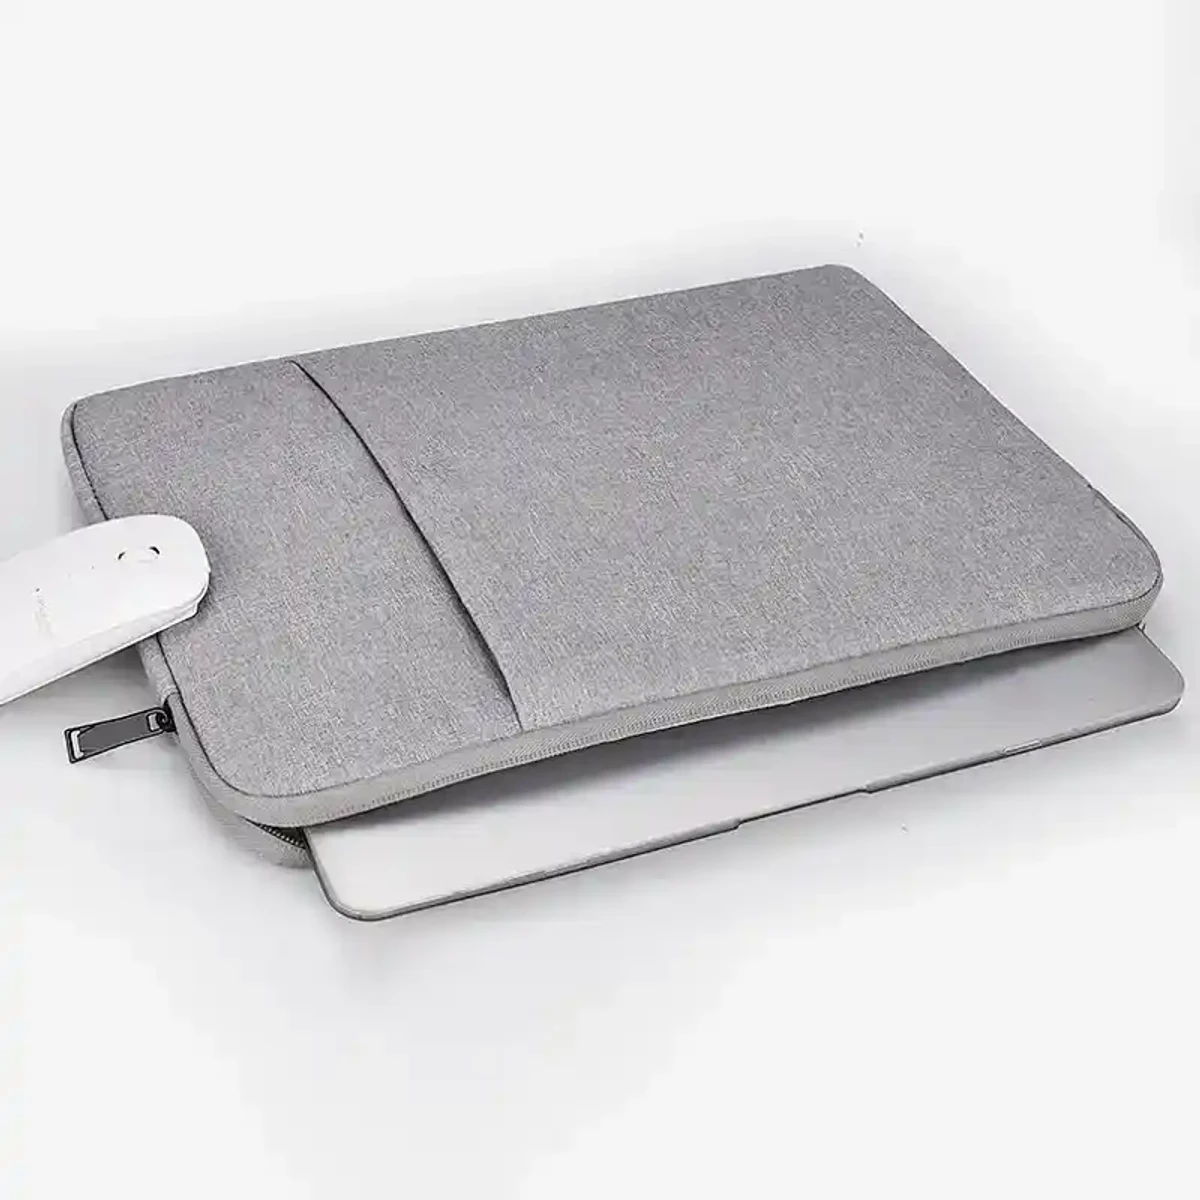 Sleeve Case For Laptop Up to 15.4 Inches Bag